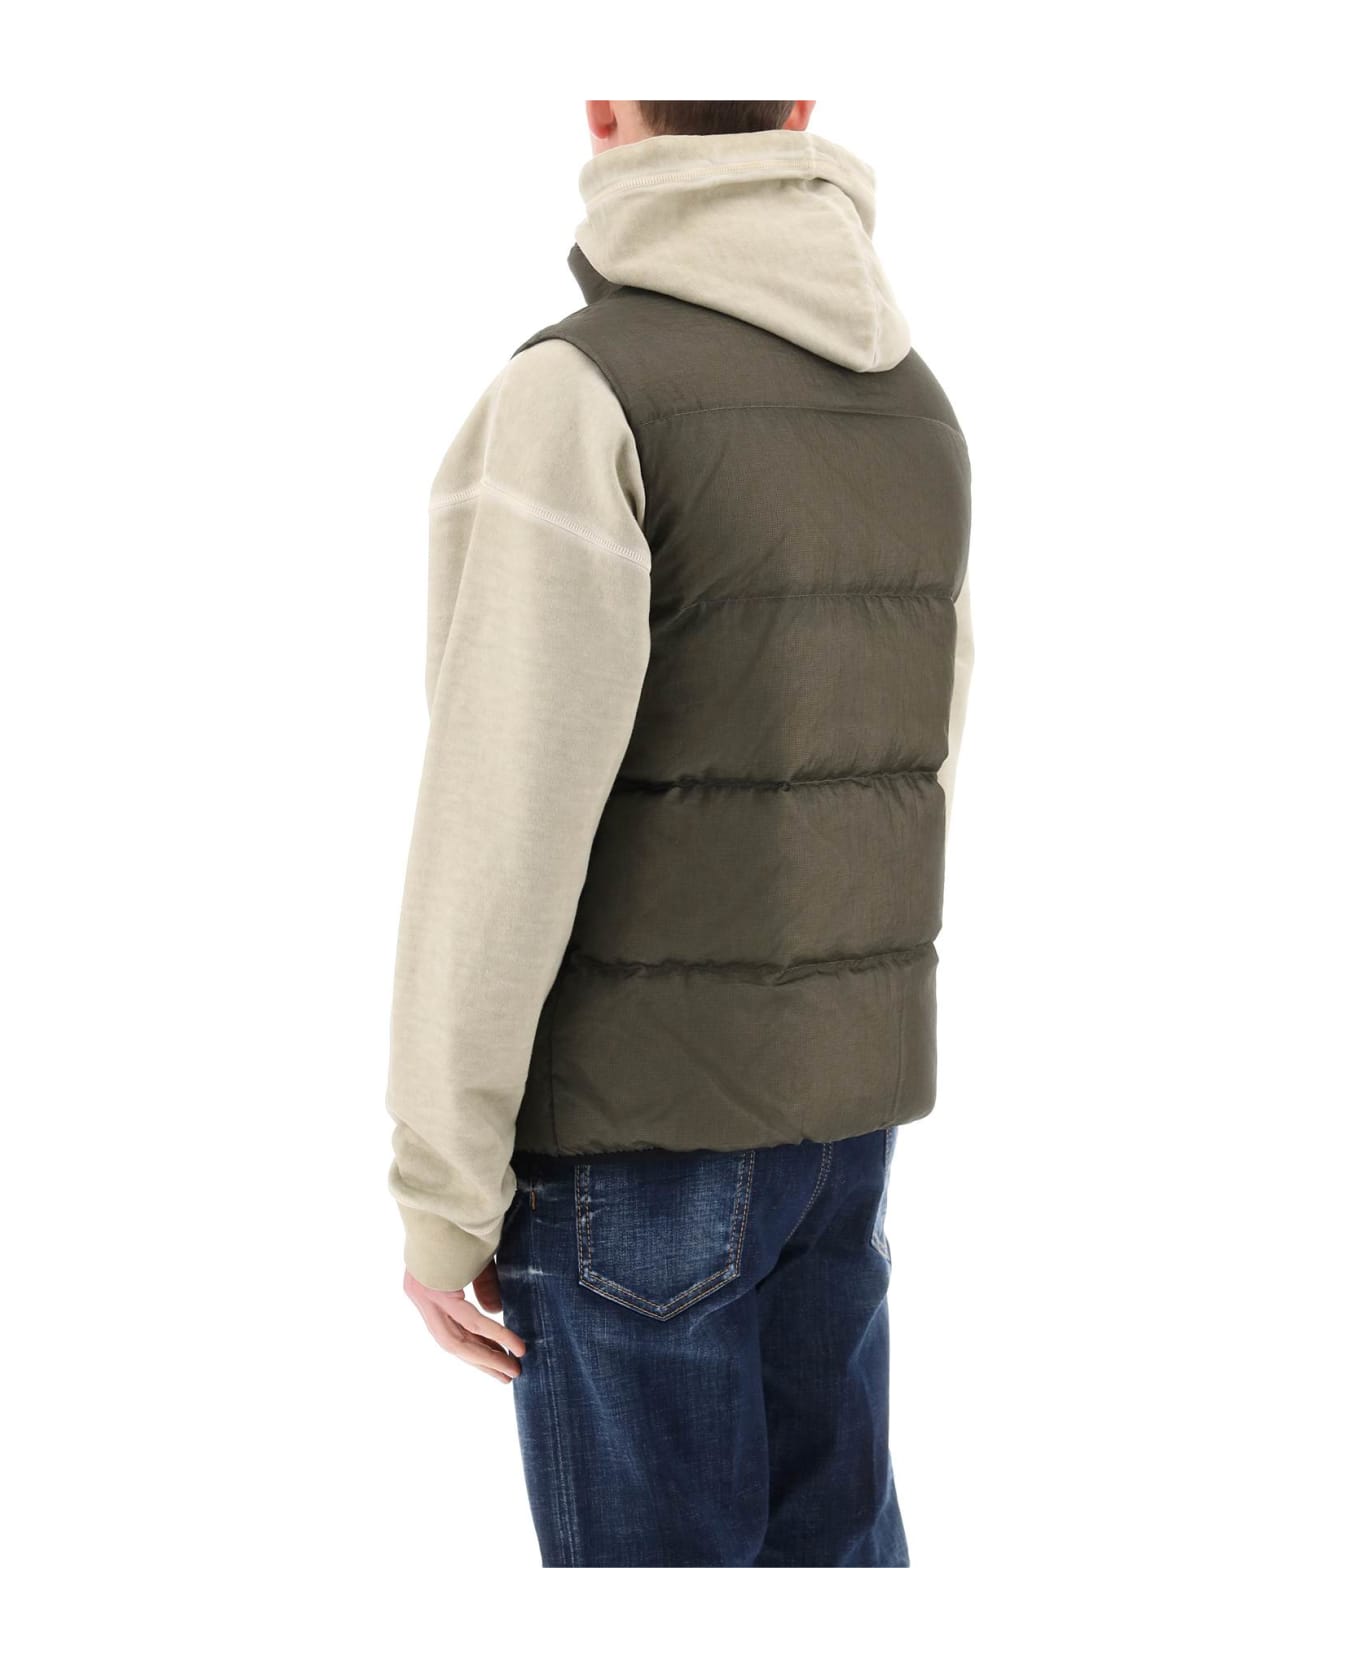 Dsquared2 Puffer Vest - MILITARY GREEN (Green)